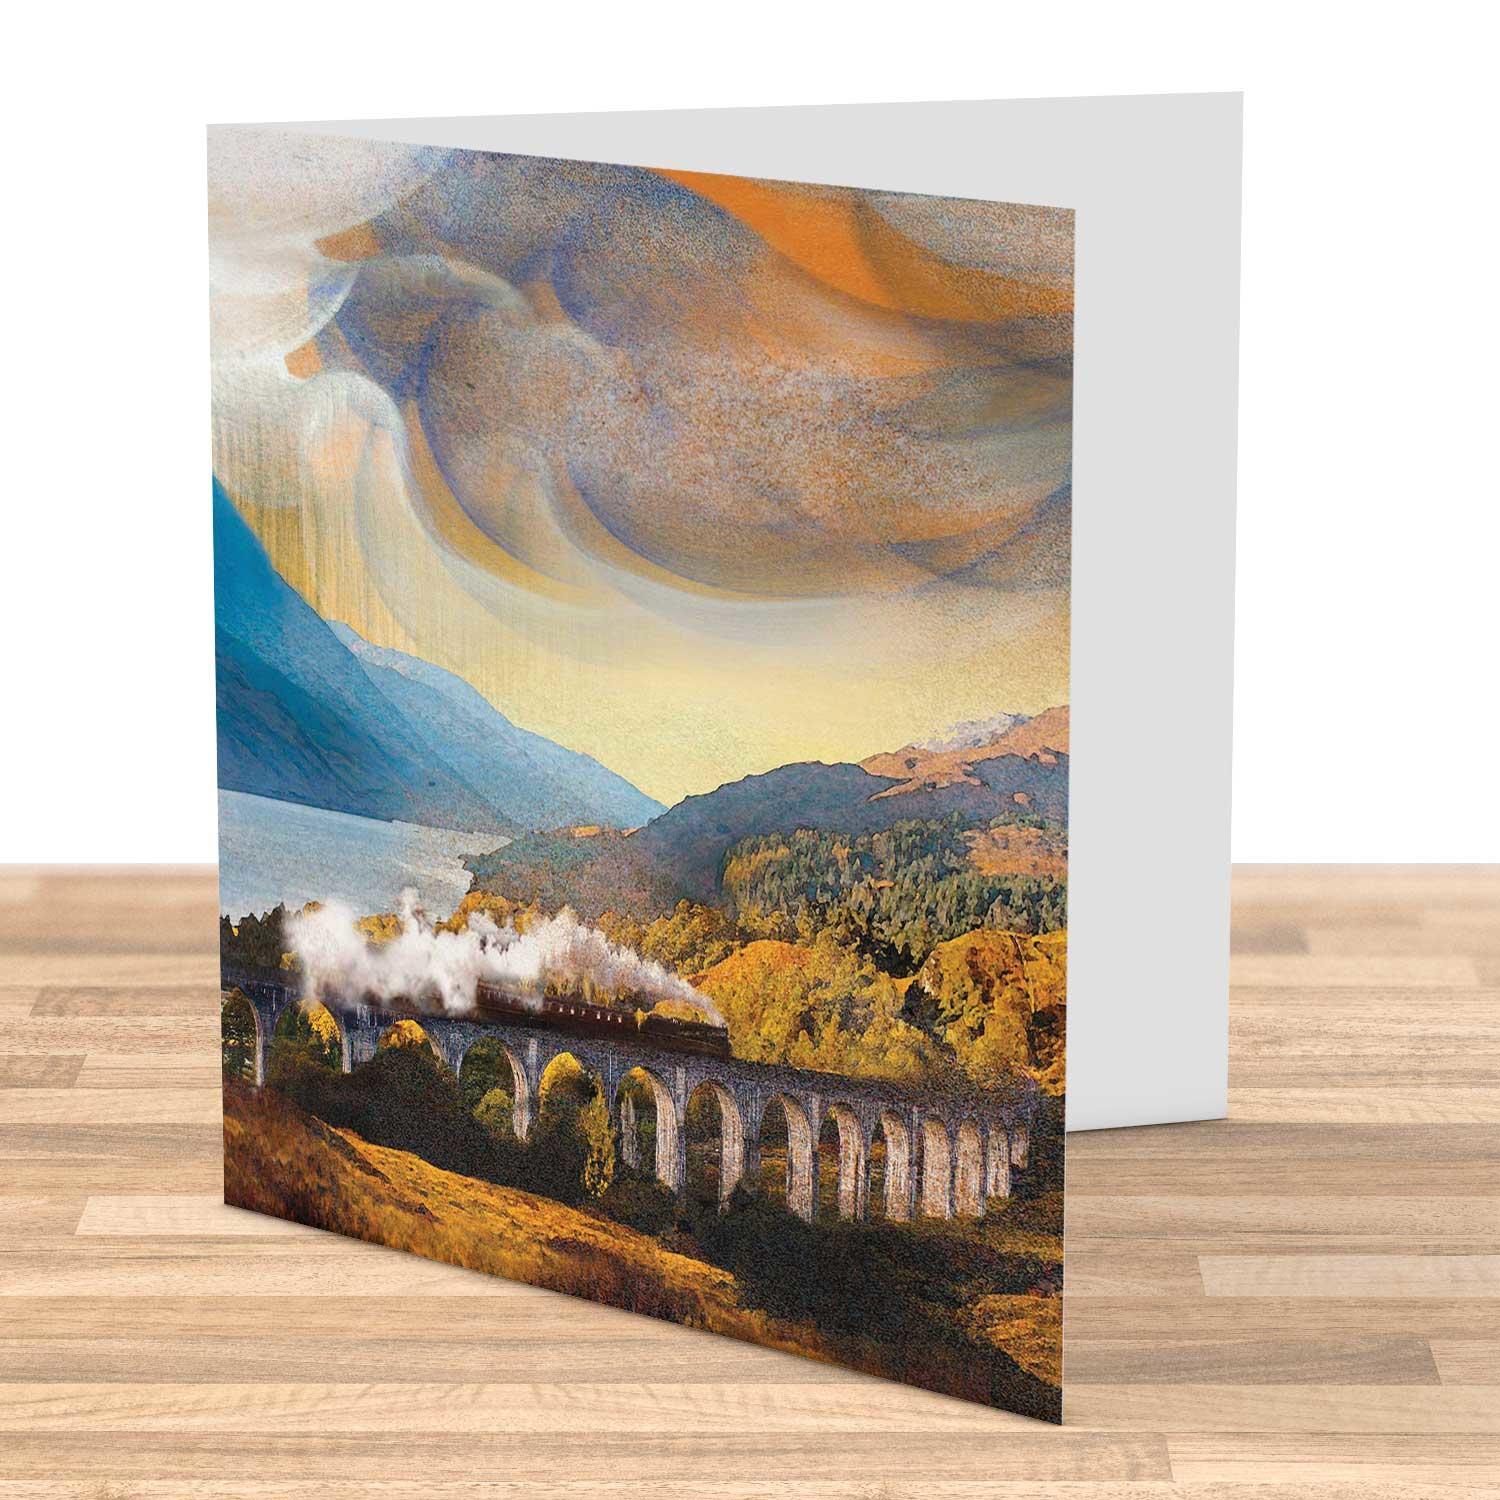 Steemin’ Up Glenfinnan, Inverness-shire Greeting Card from an original painting by artist Esther Cohen